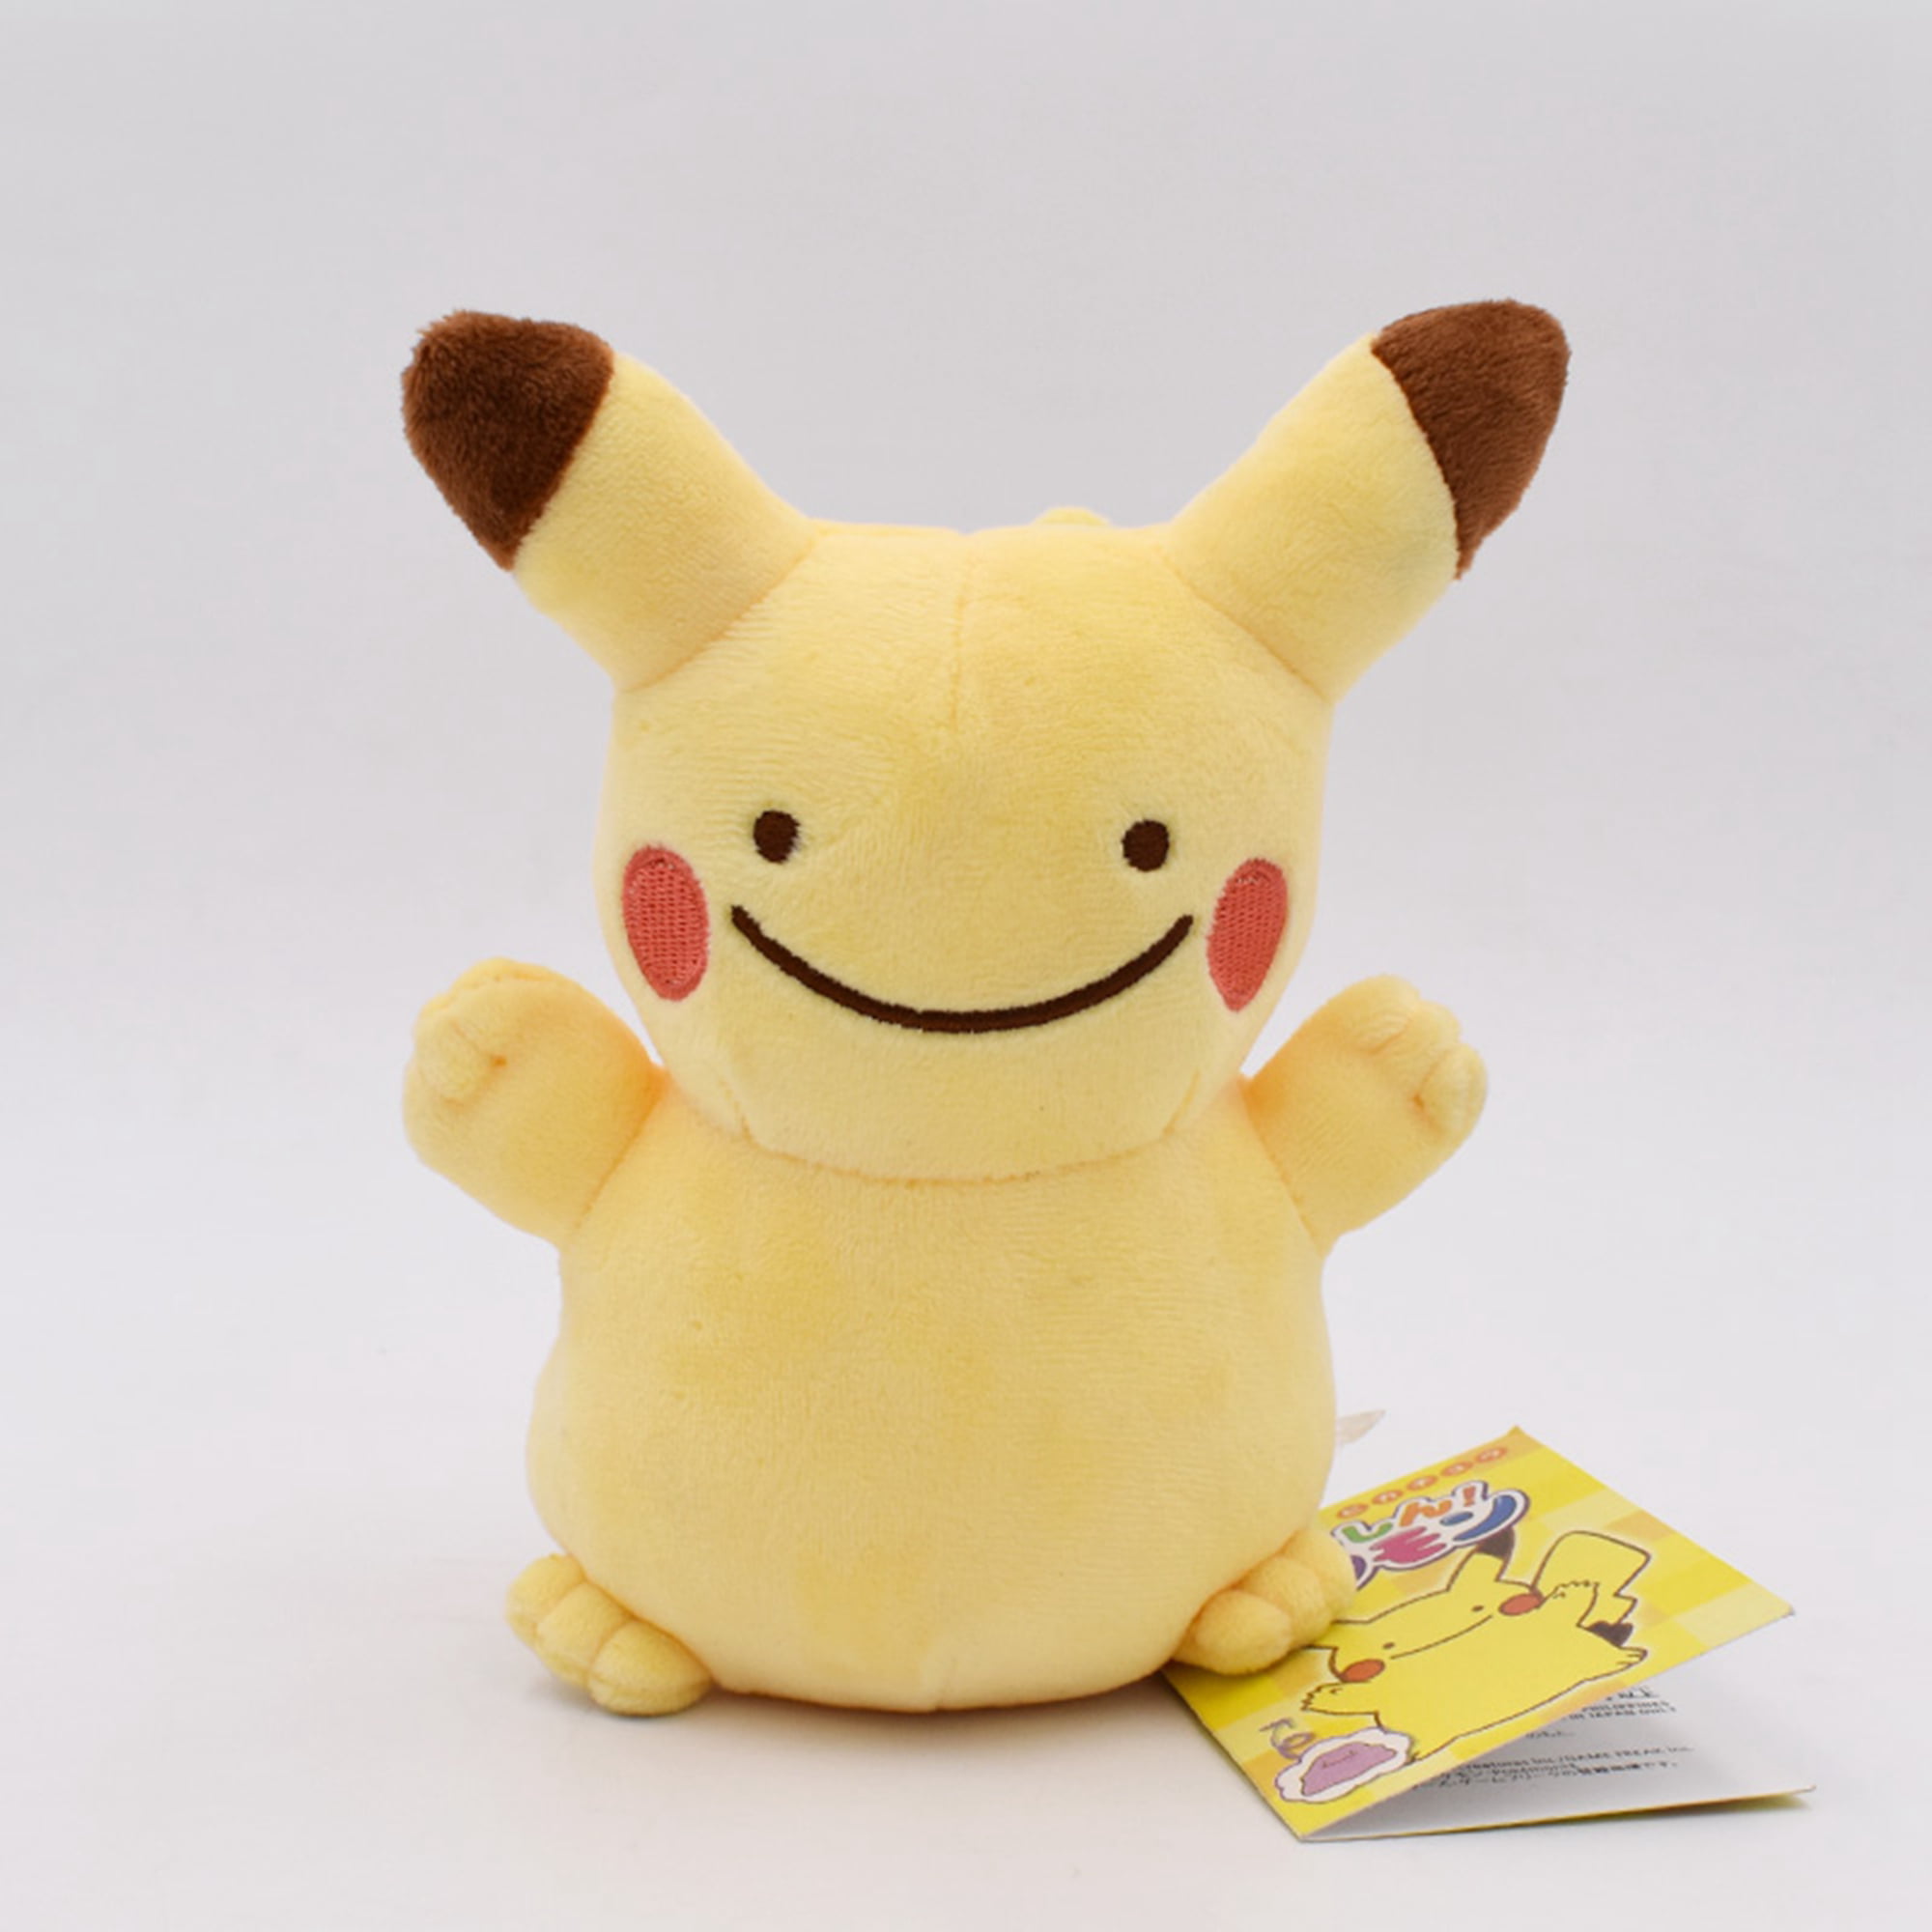 Pokemon Ditto JAPAN Soft Toy Doll Gift Anime Figure Stuffed Collectible Plush